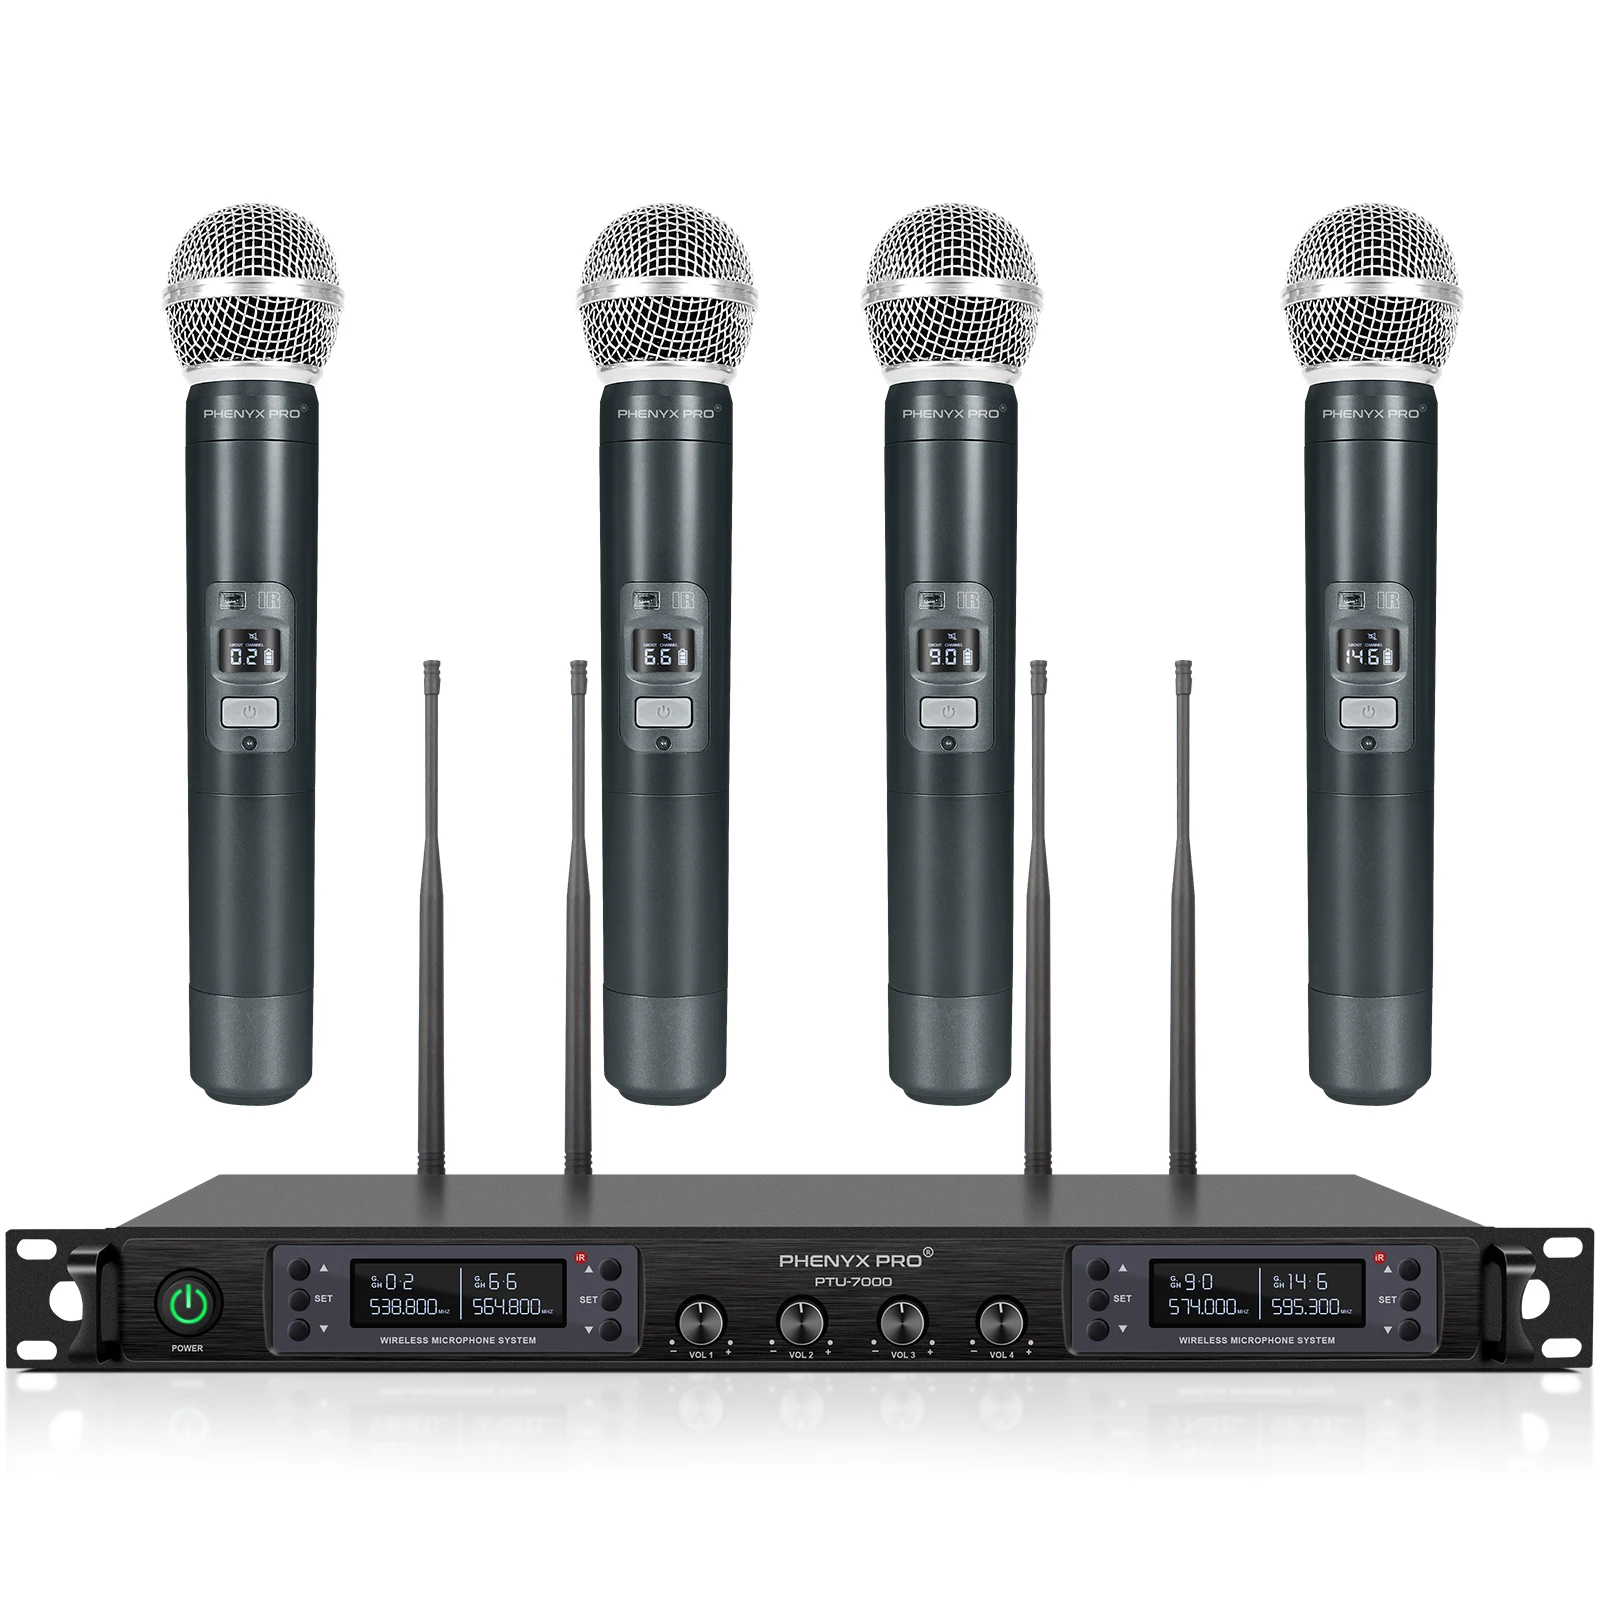 Phenyx Pro UHF Wireless Microphone System PTU-7000 with 4x40Channels Handheld Mics Auto Scan Selectable Frequency for Church